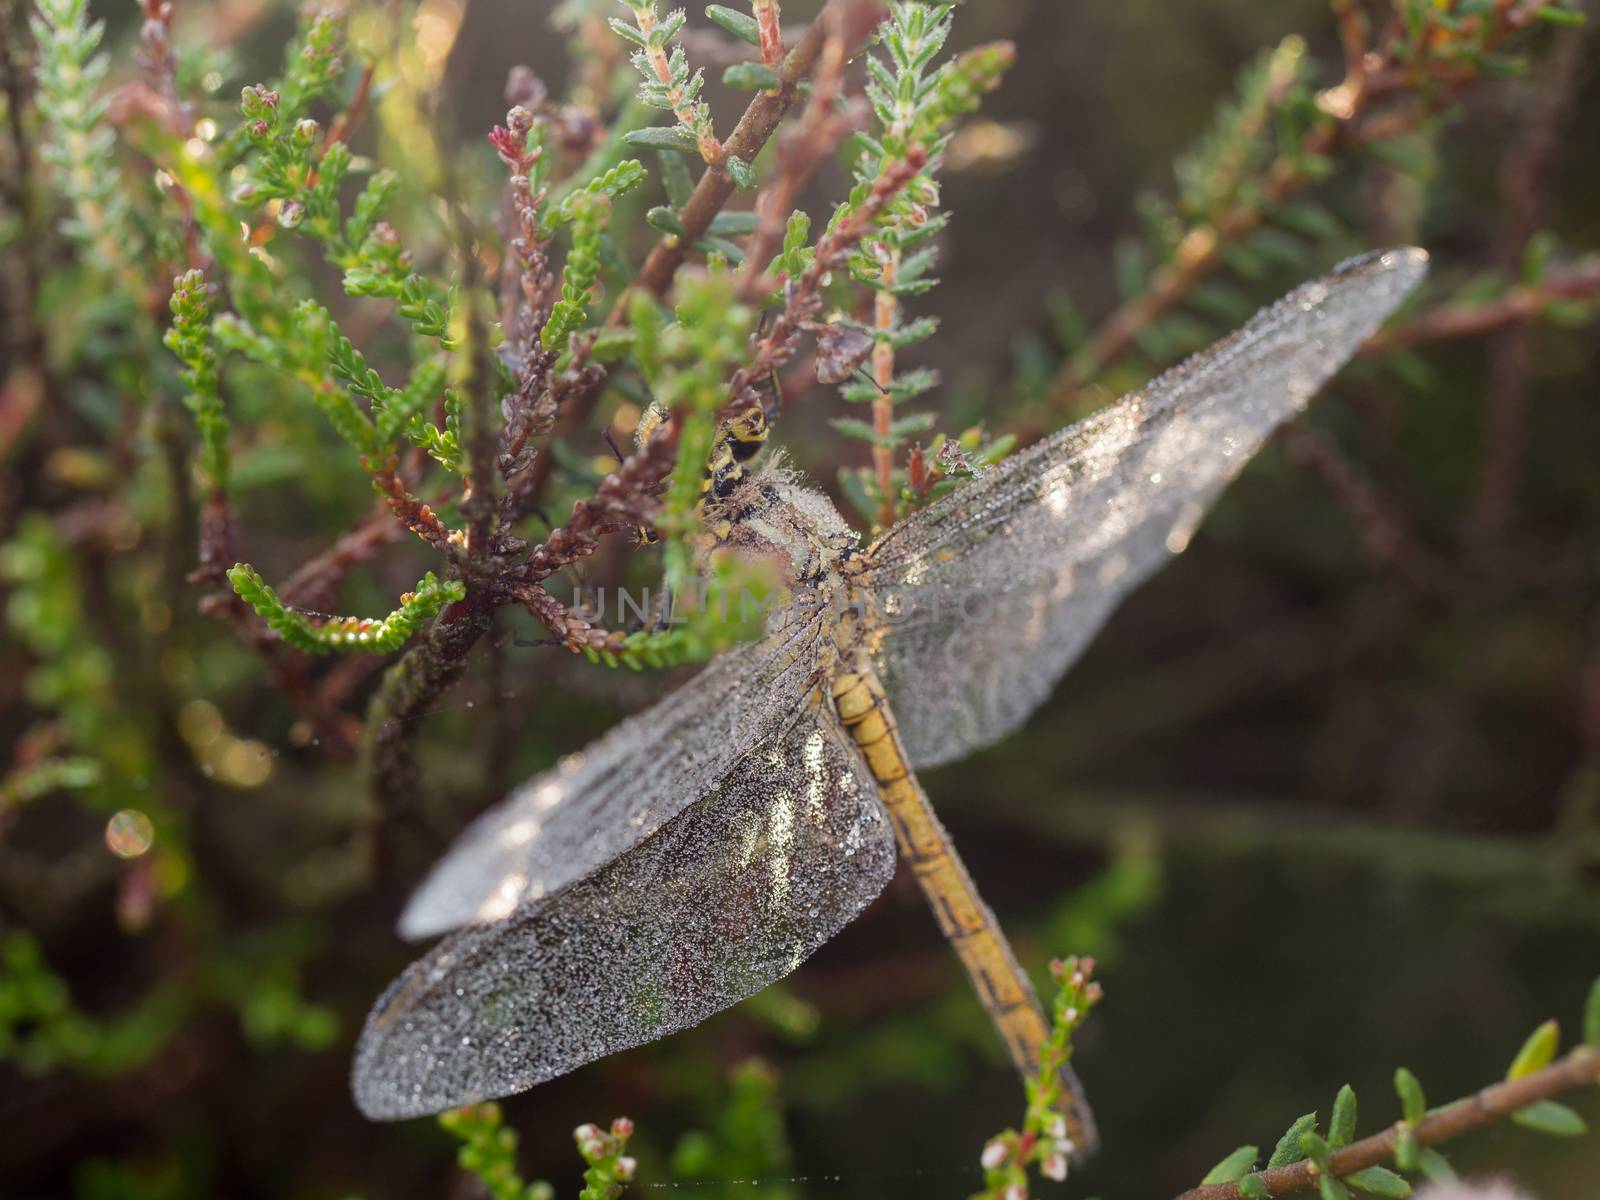 Early morning dragonfly with dew covered wings